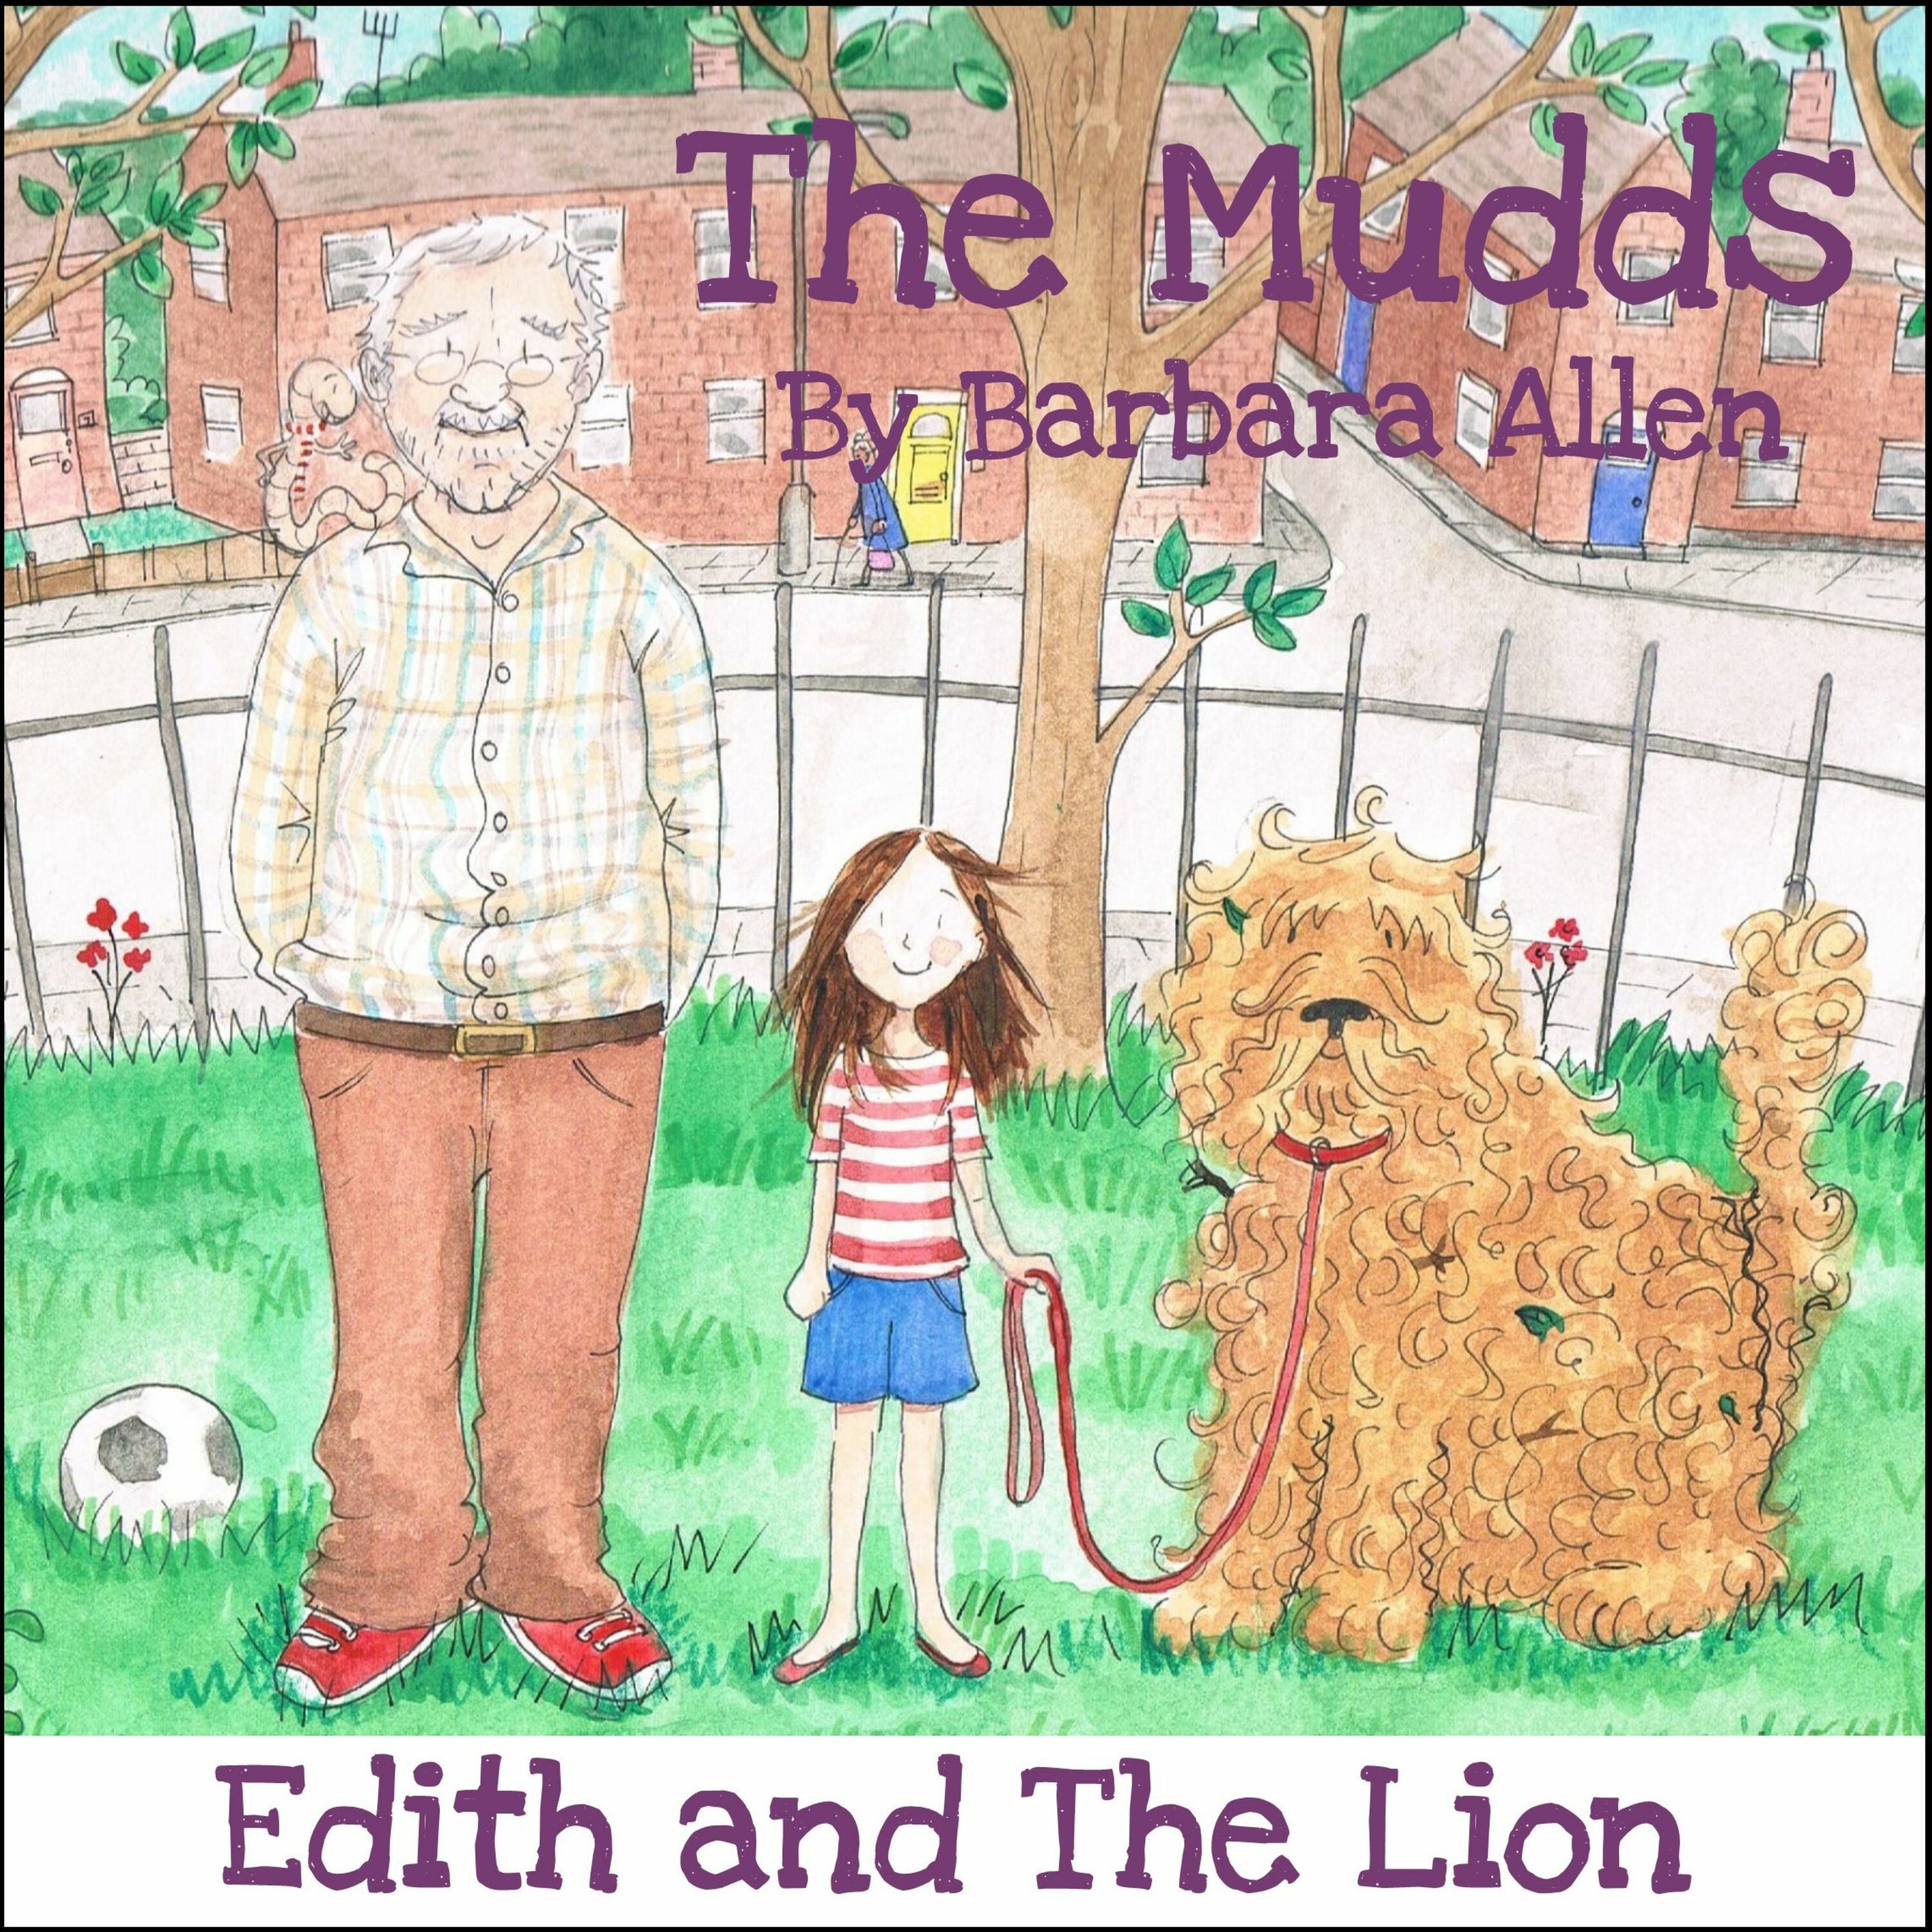 Edith and the Lion